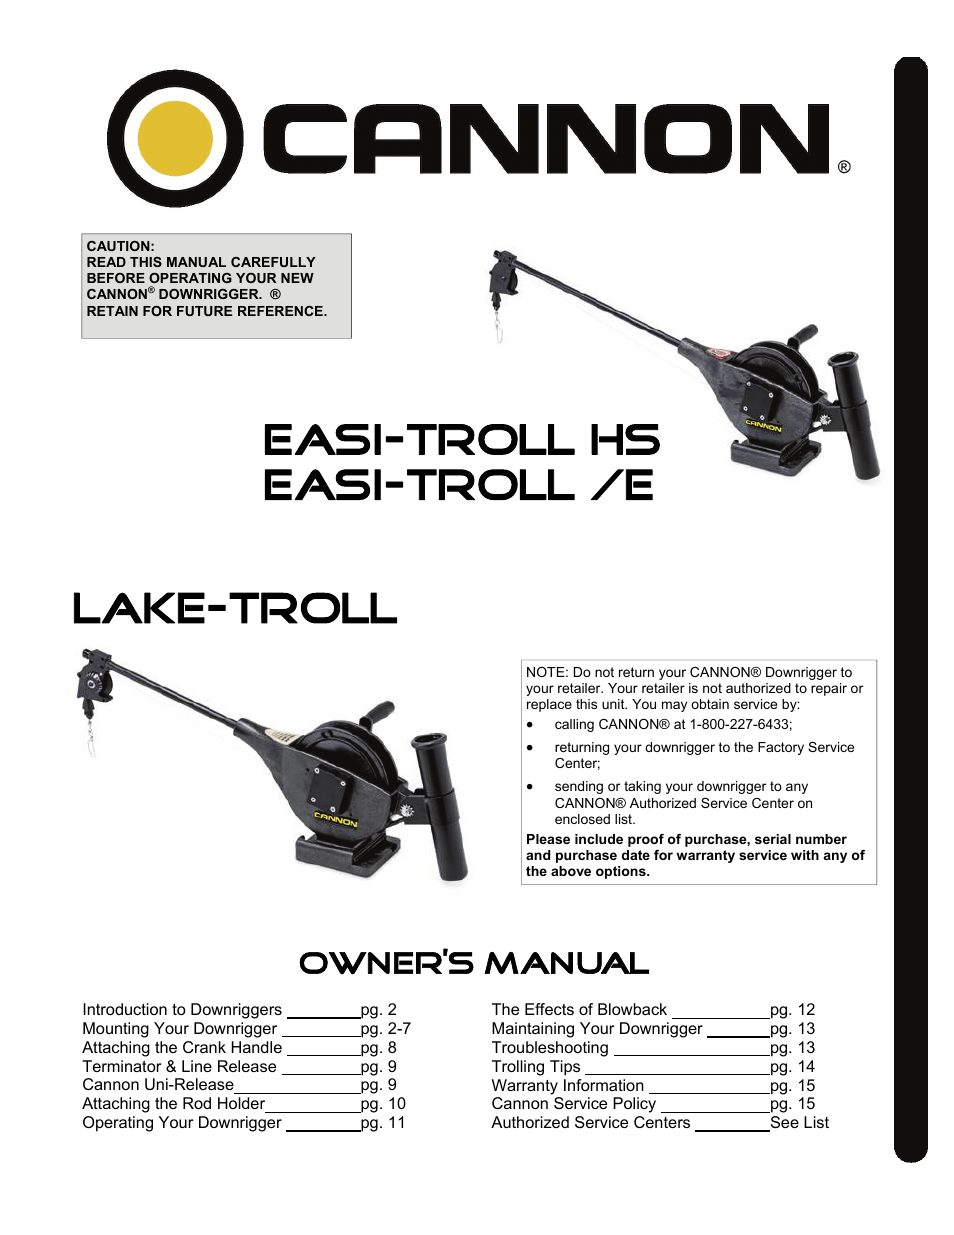 Cannon LAKE-TROLL User Manual | 16 pages | Also for: EASI-TROLL /E